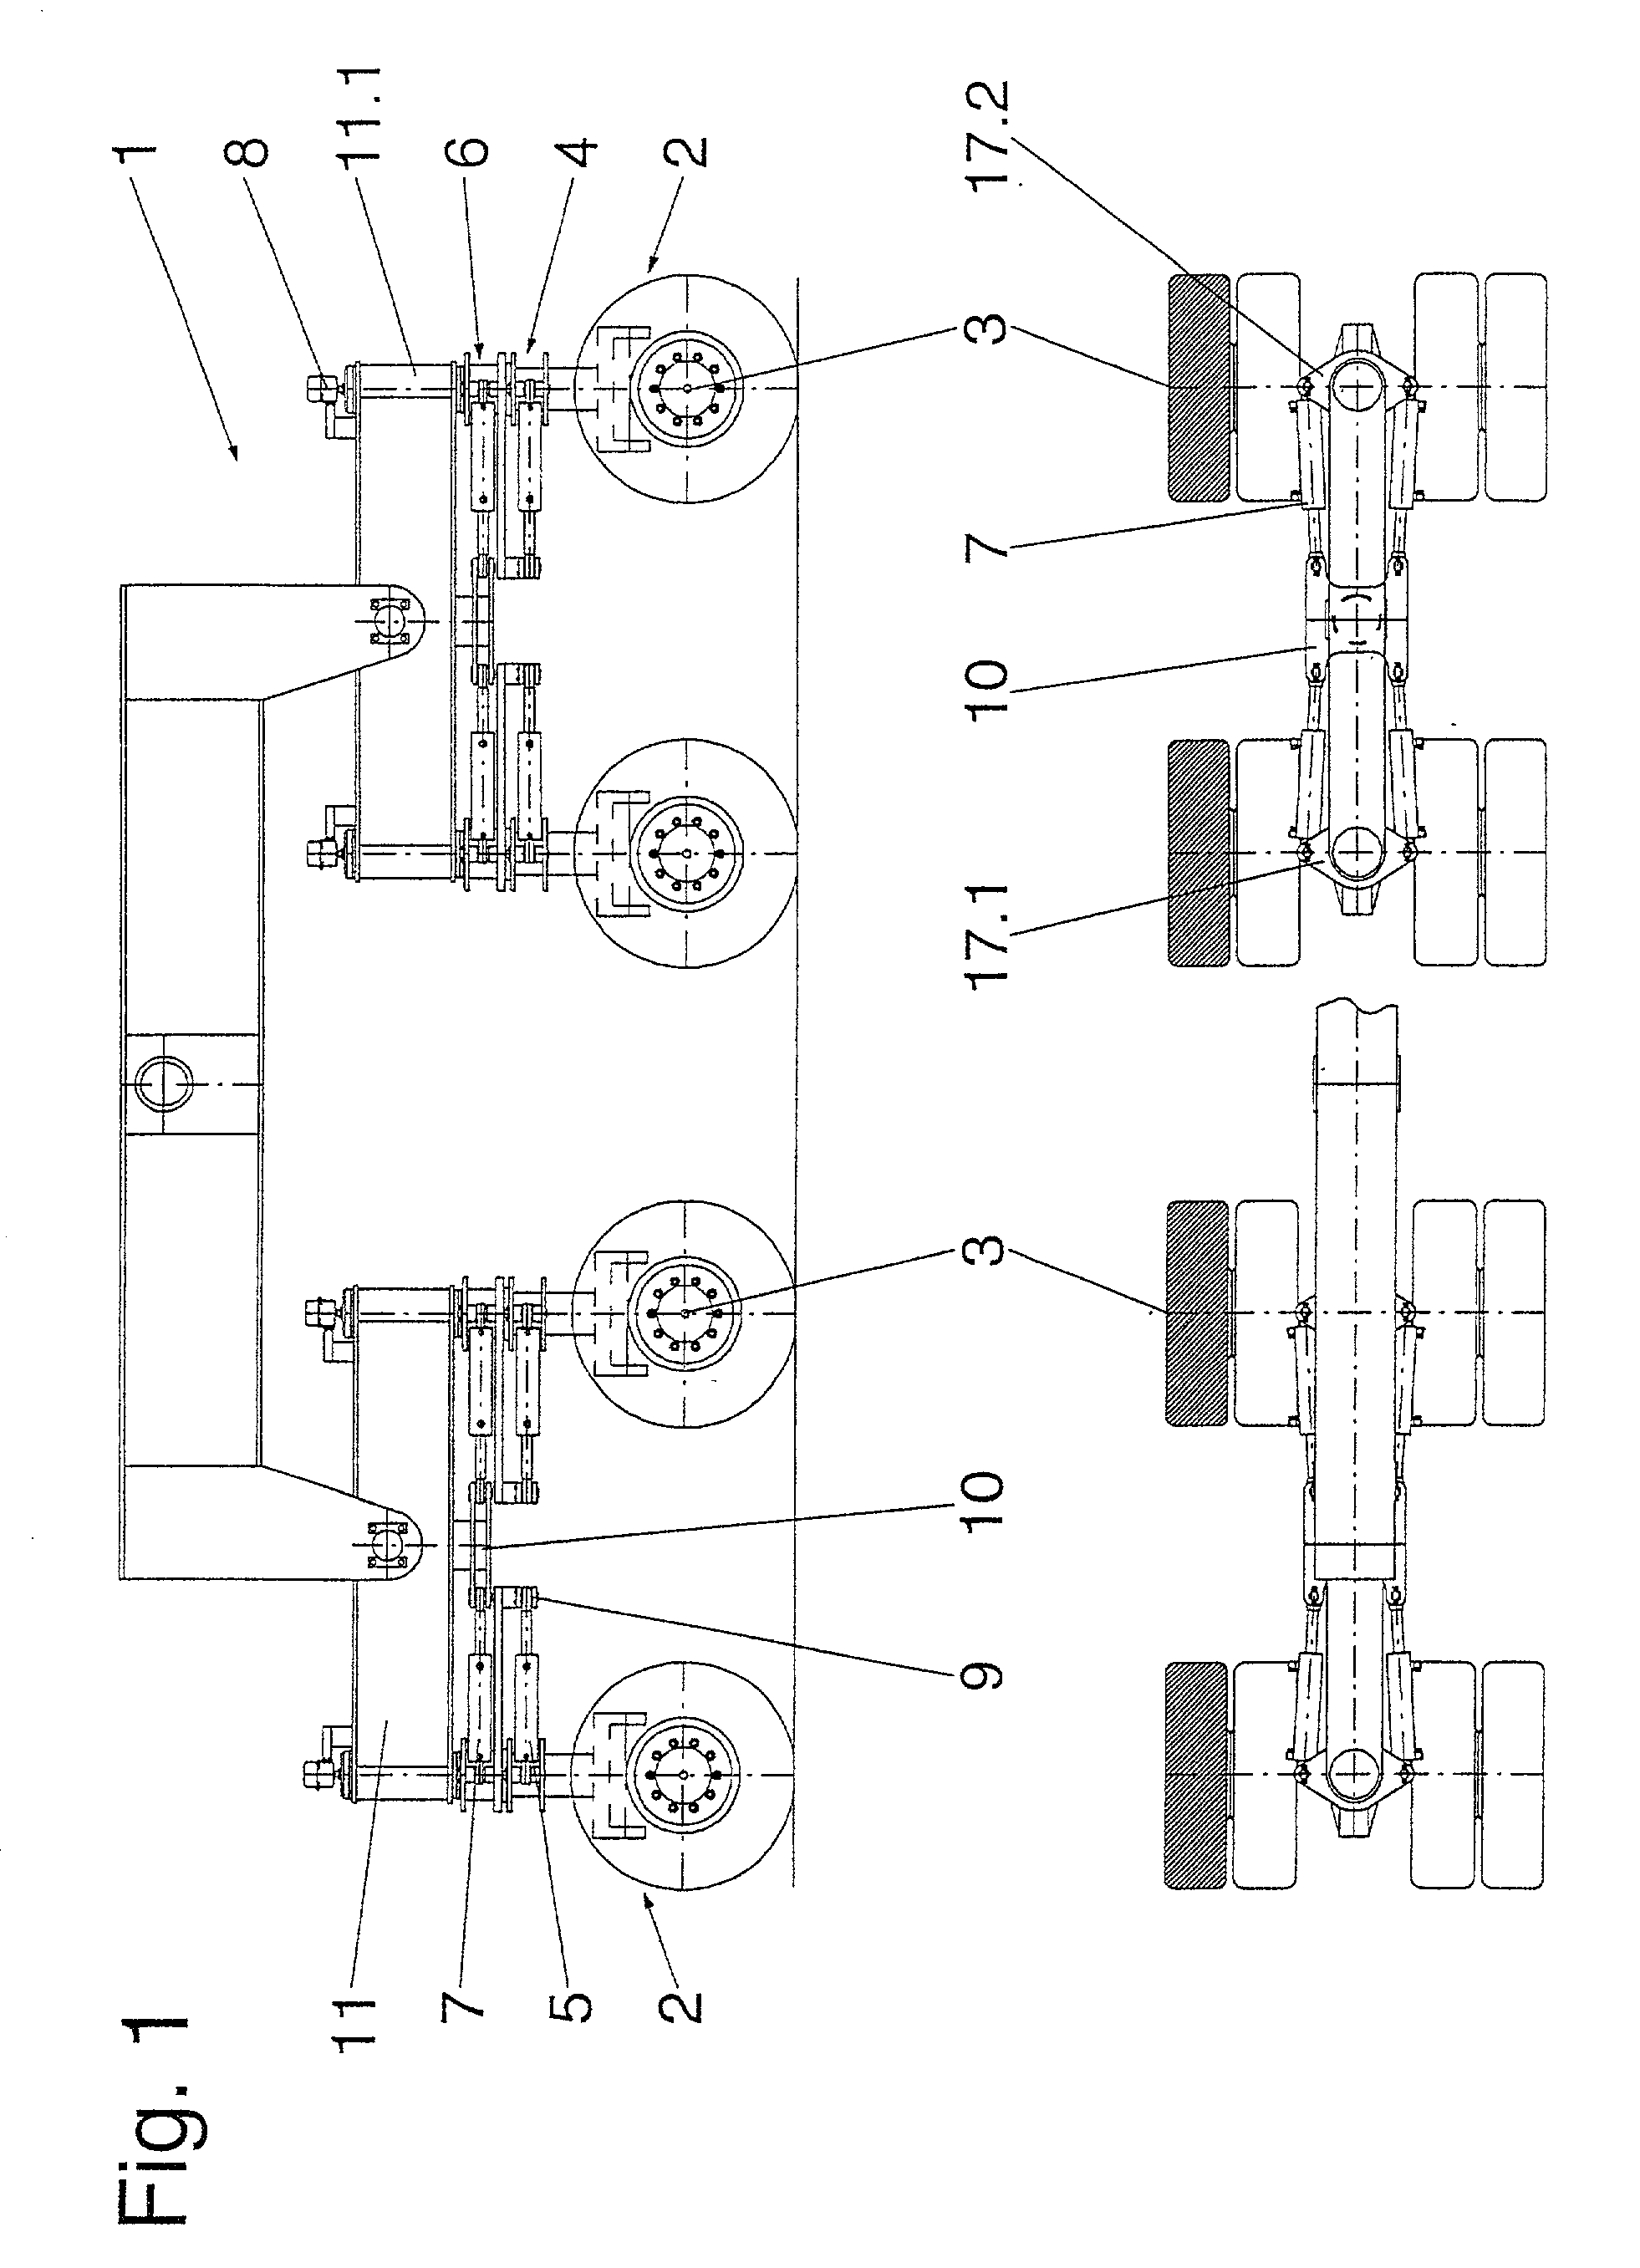 Steering device for axles